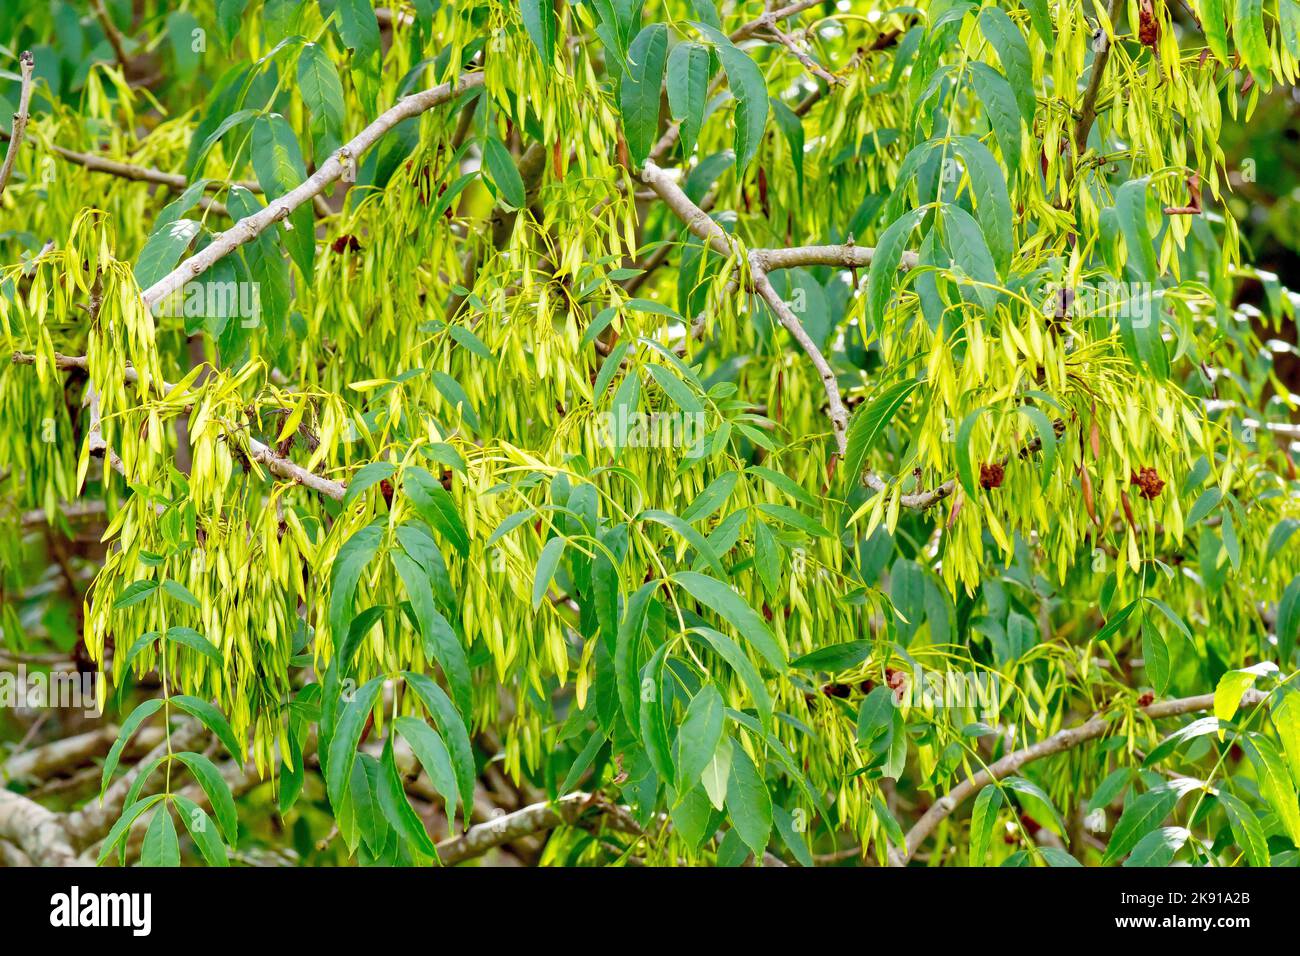 Ash (fraxinus excelsior), close up showing the tree in fruit with a mass of unripe green keys which will eventually go brown in the autumn. Stock Photo